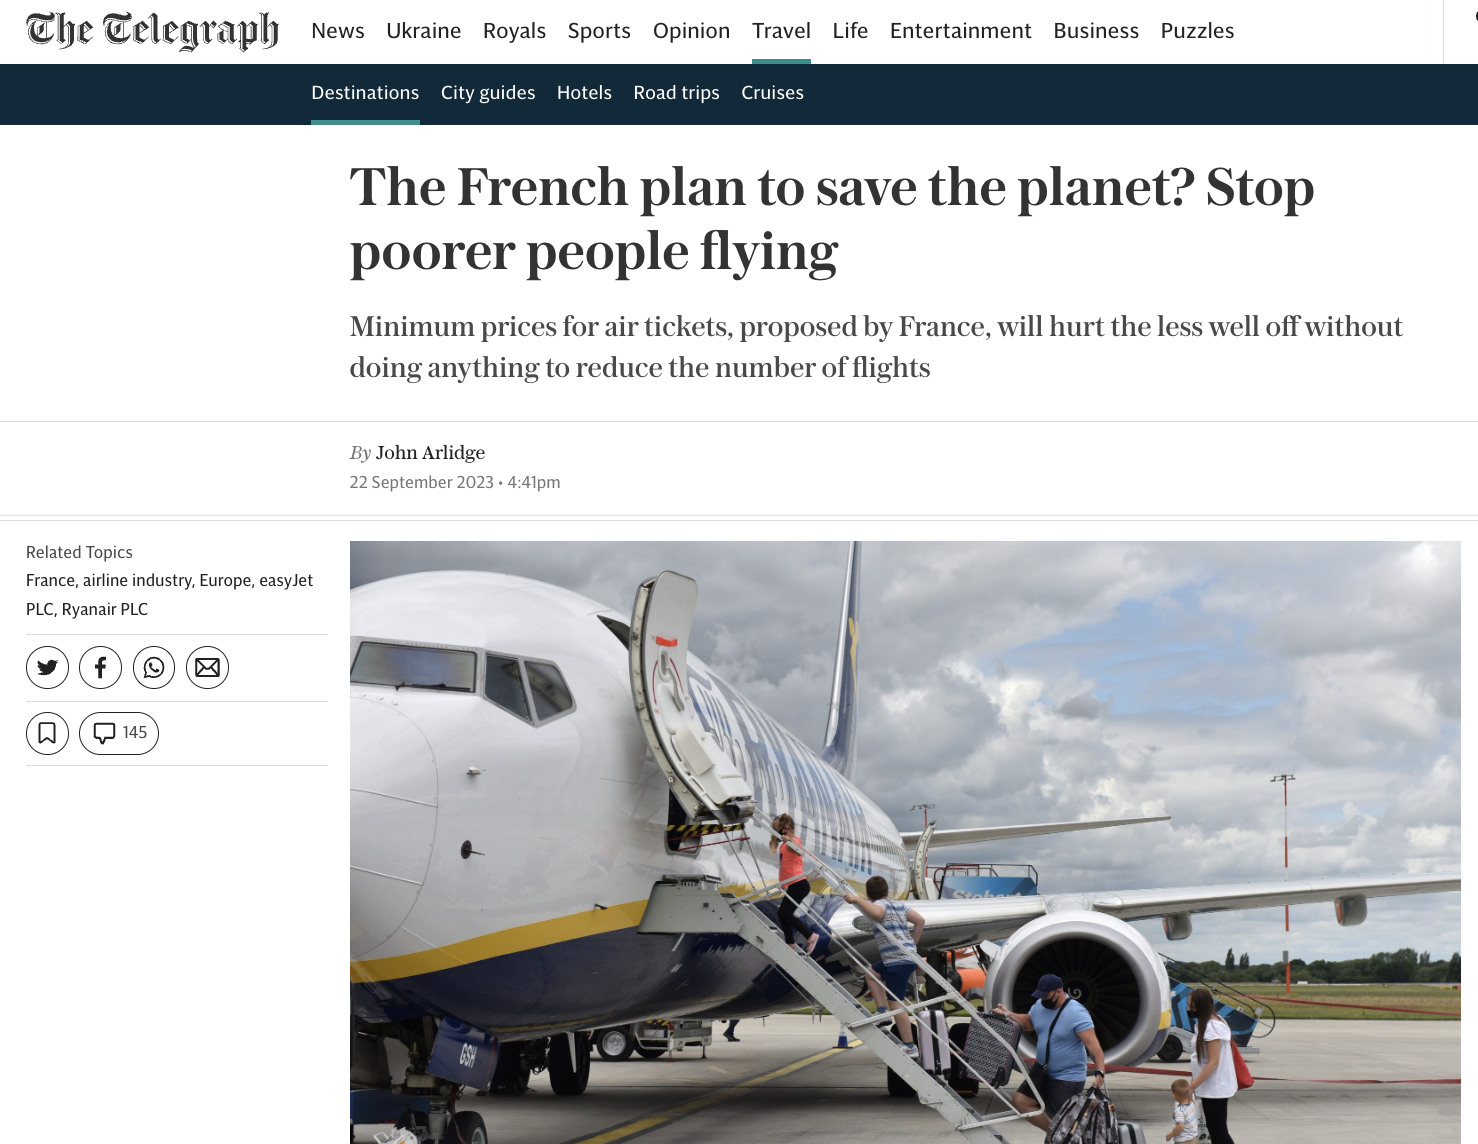 UK Telegraph: The French plan to save the planet? Stop poorer people flying – Seeking ‘a minimum price for airfares within the EU in a bid to reduce the number of flights’ to reduce CO2 emissions